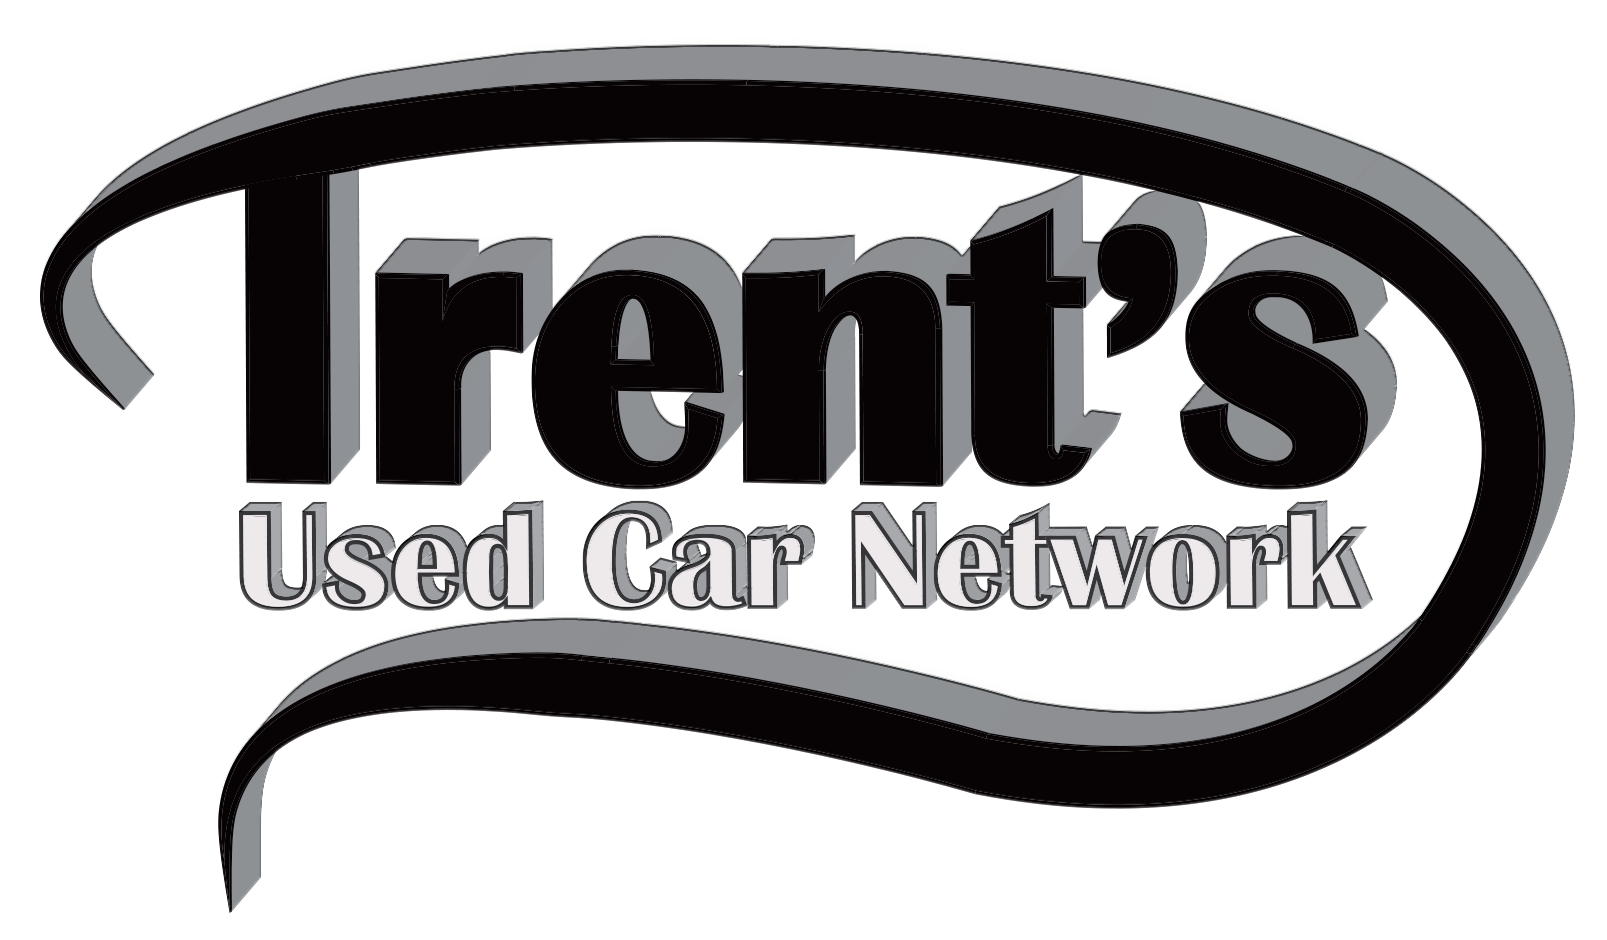 About Trent's Used Car Network and reviews